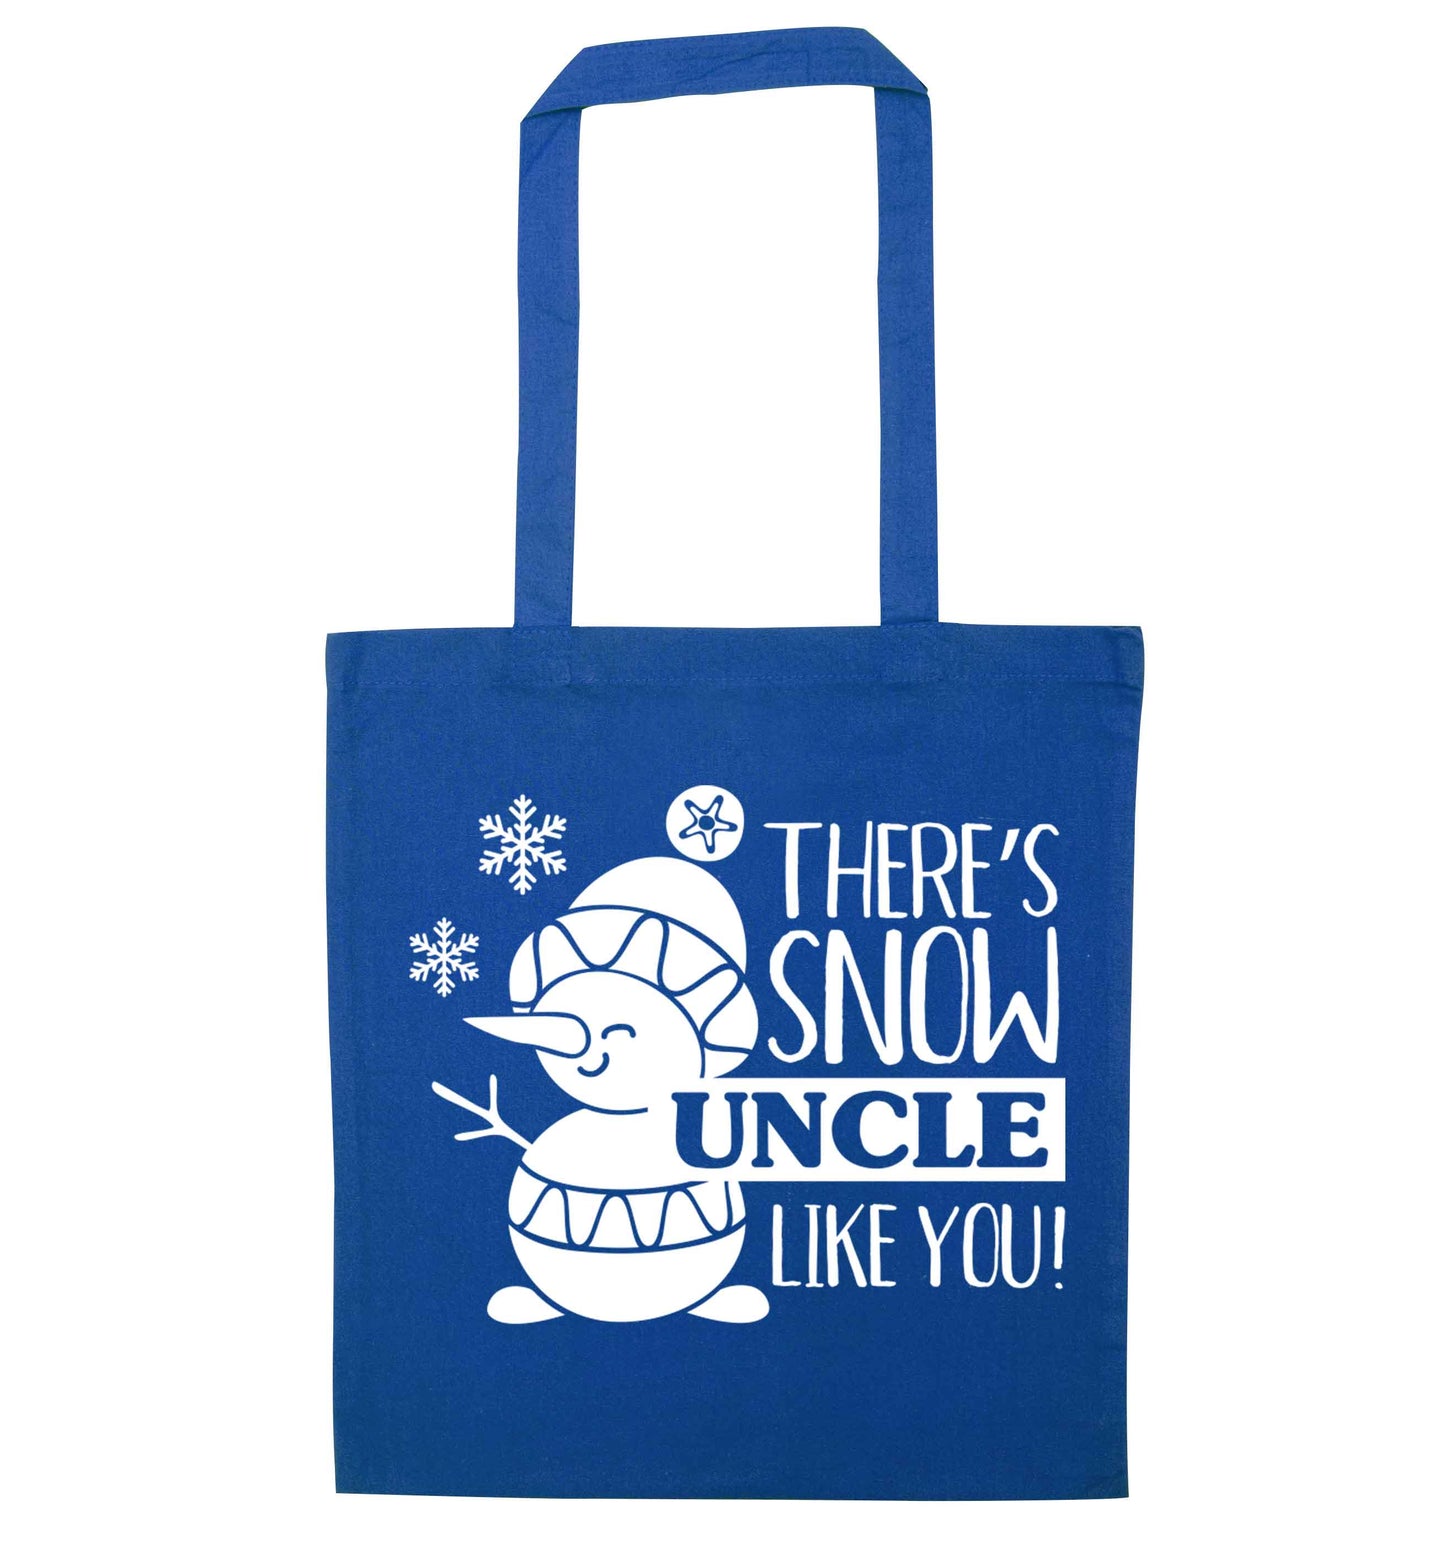 There's snow uncle like you blue tote bag